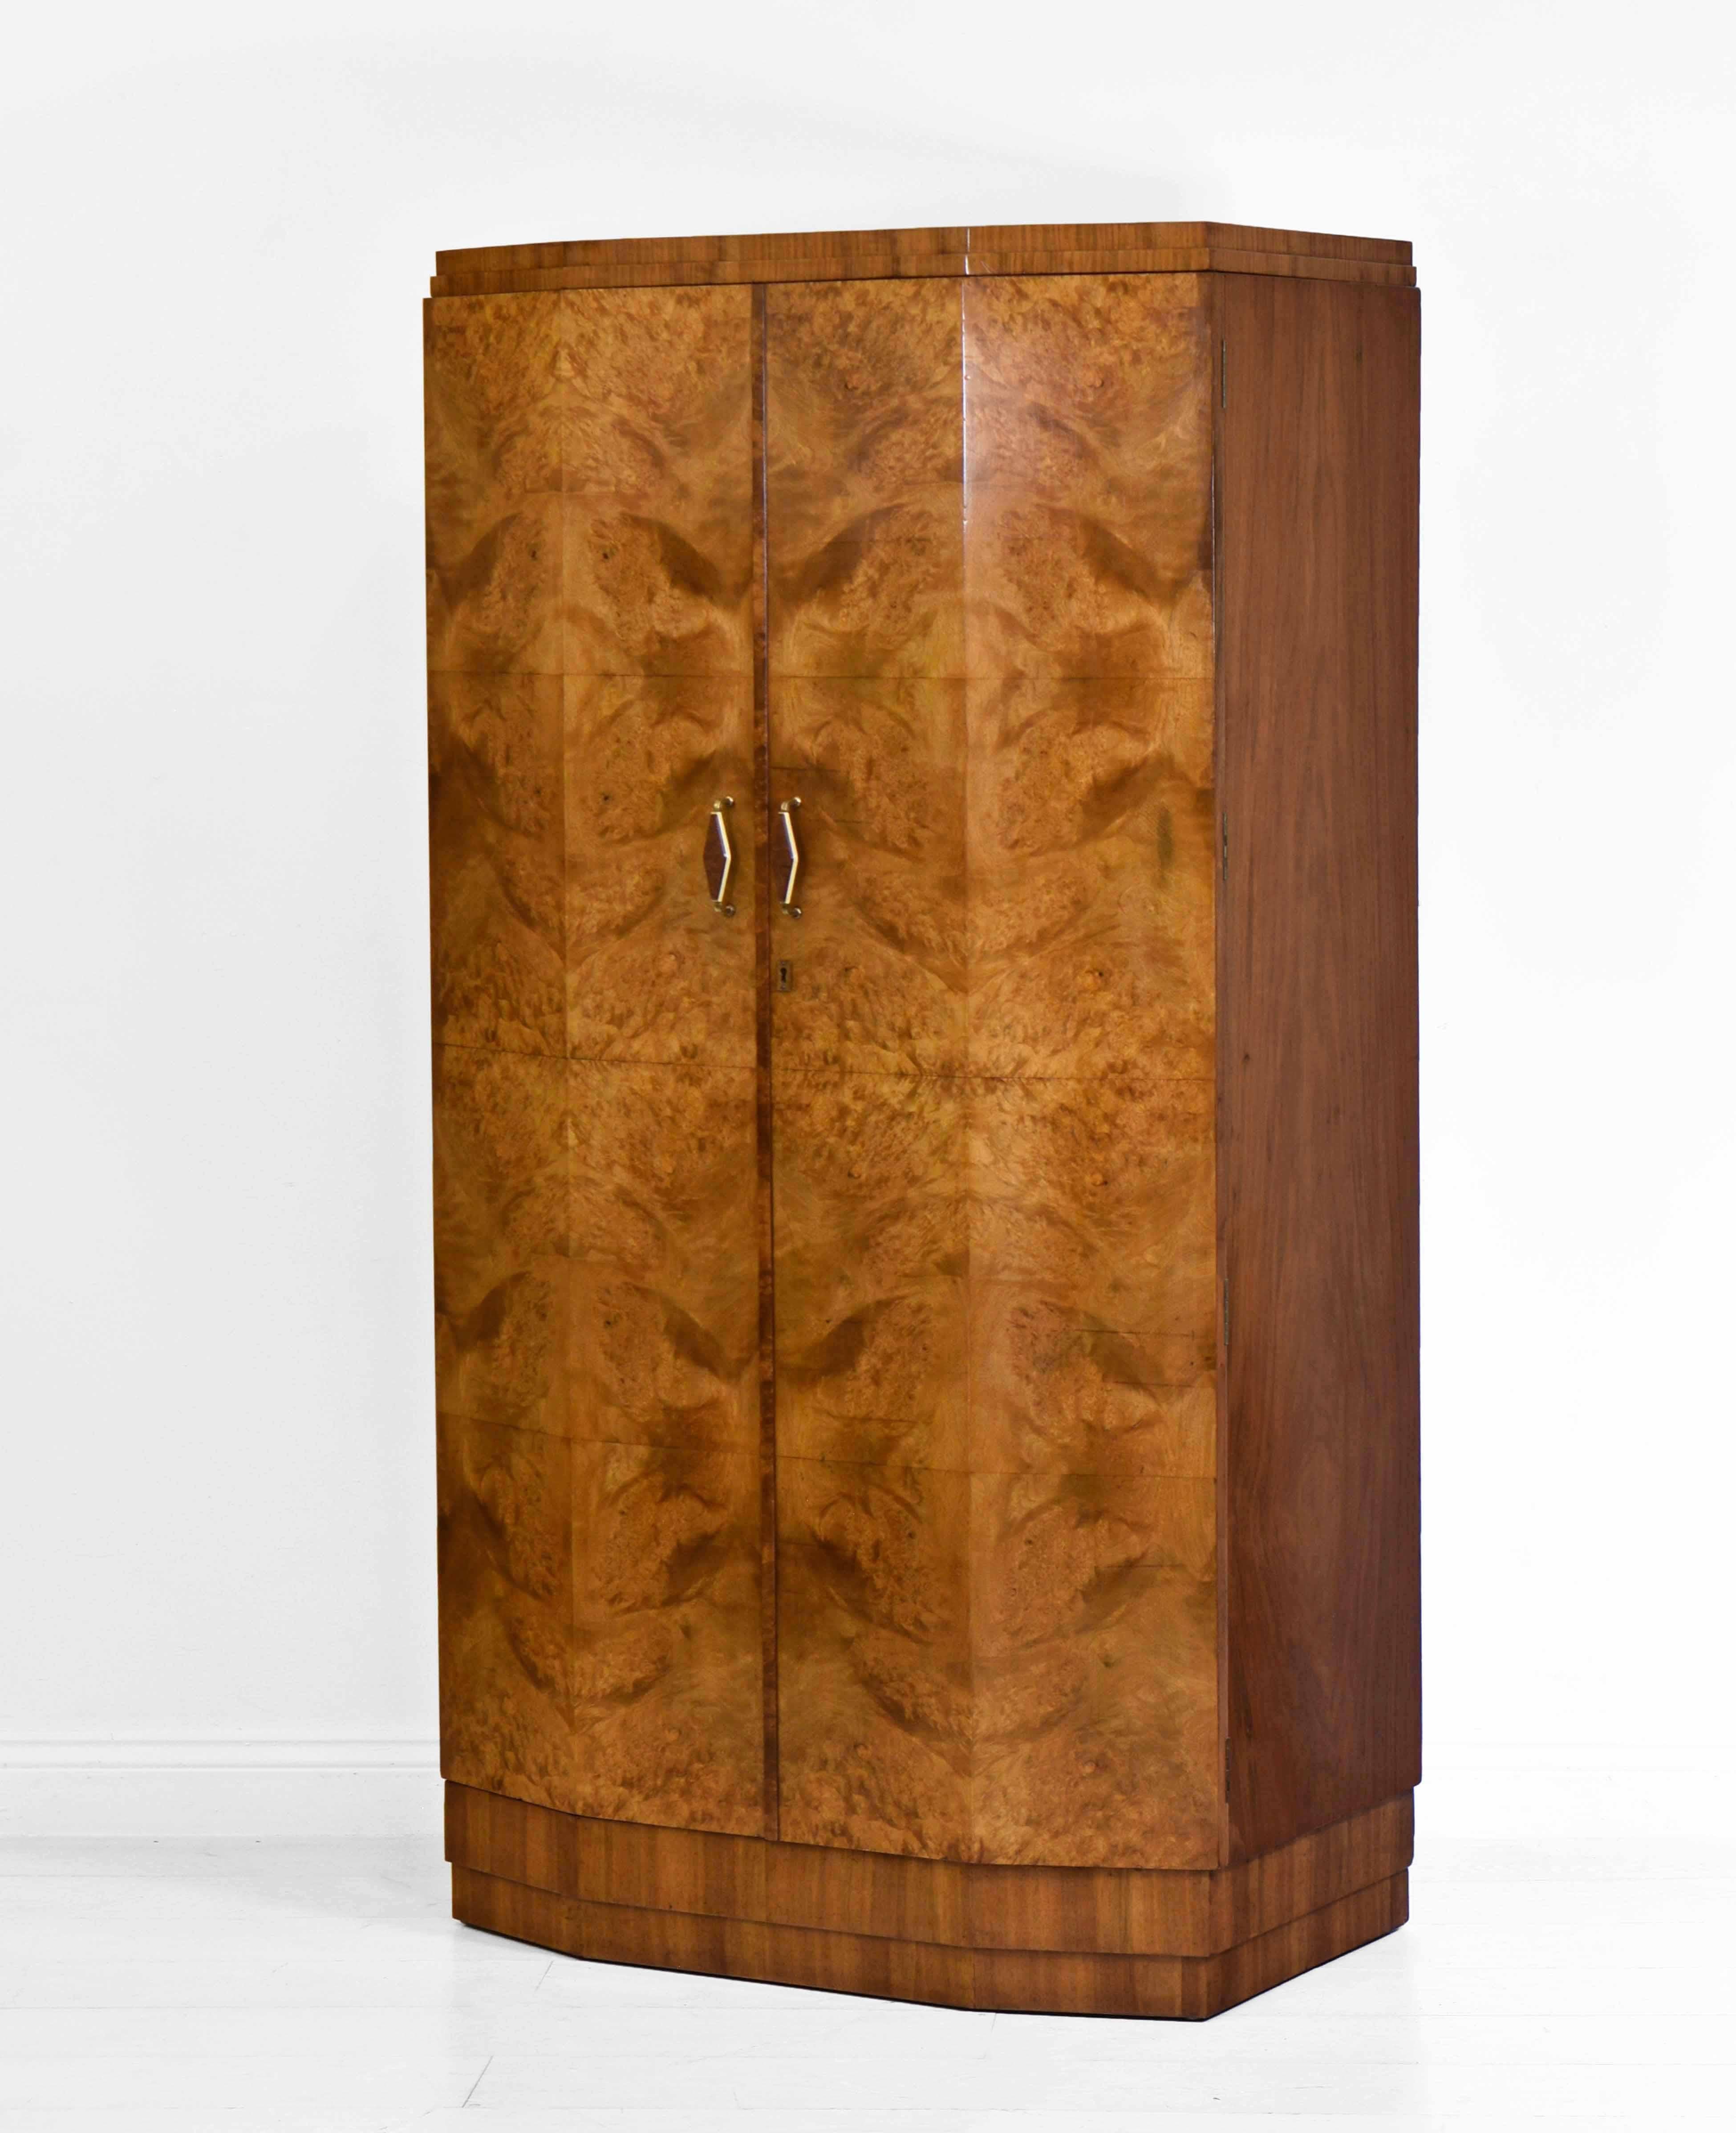 Superb Art Deco burr and figured walnut canted design gentlemen's compactum on stepped plinth. Circa 1930.

*Free delivery for all areas in mainland England & Wales only. Delivery to room of choice with good access by a two person team. Items are